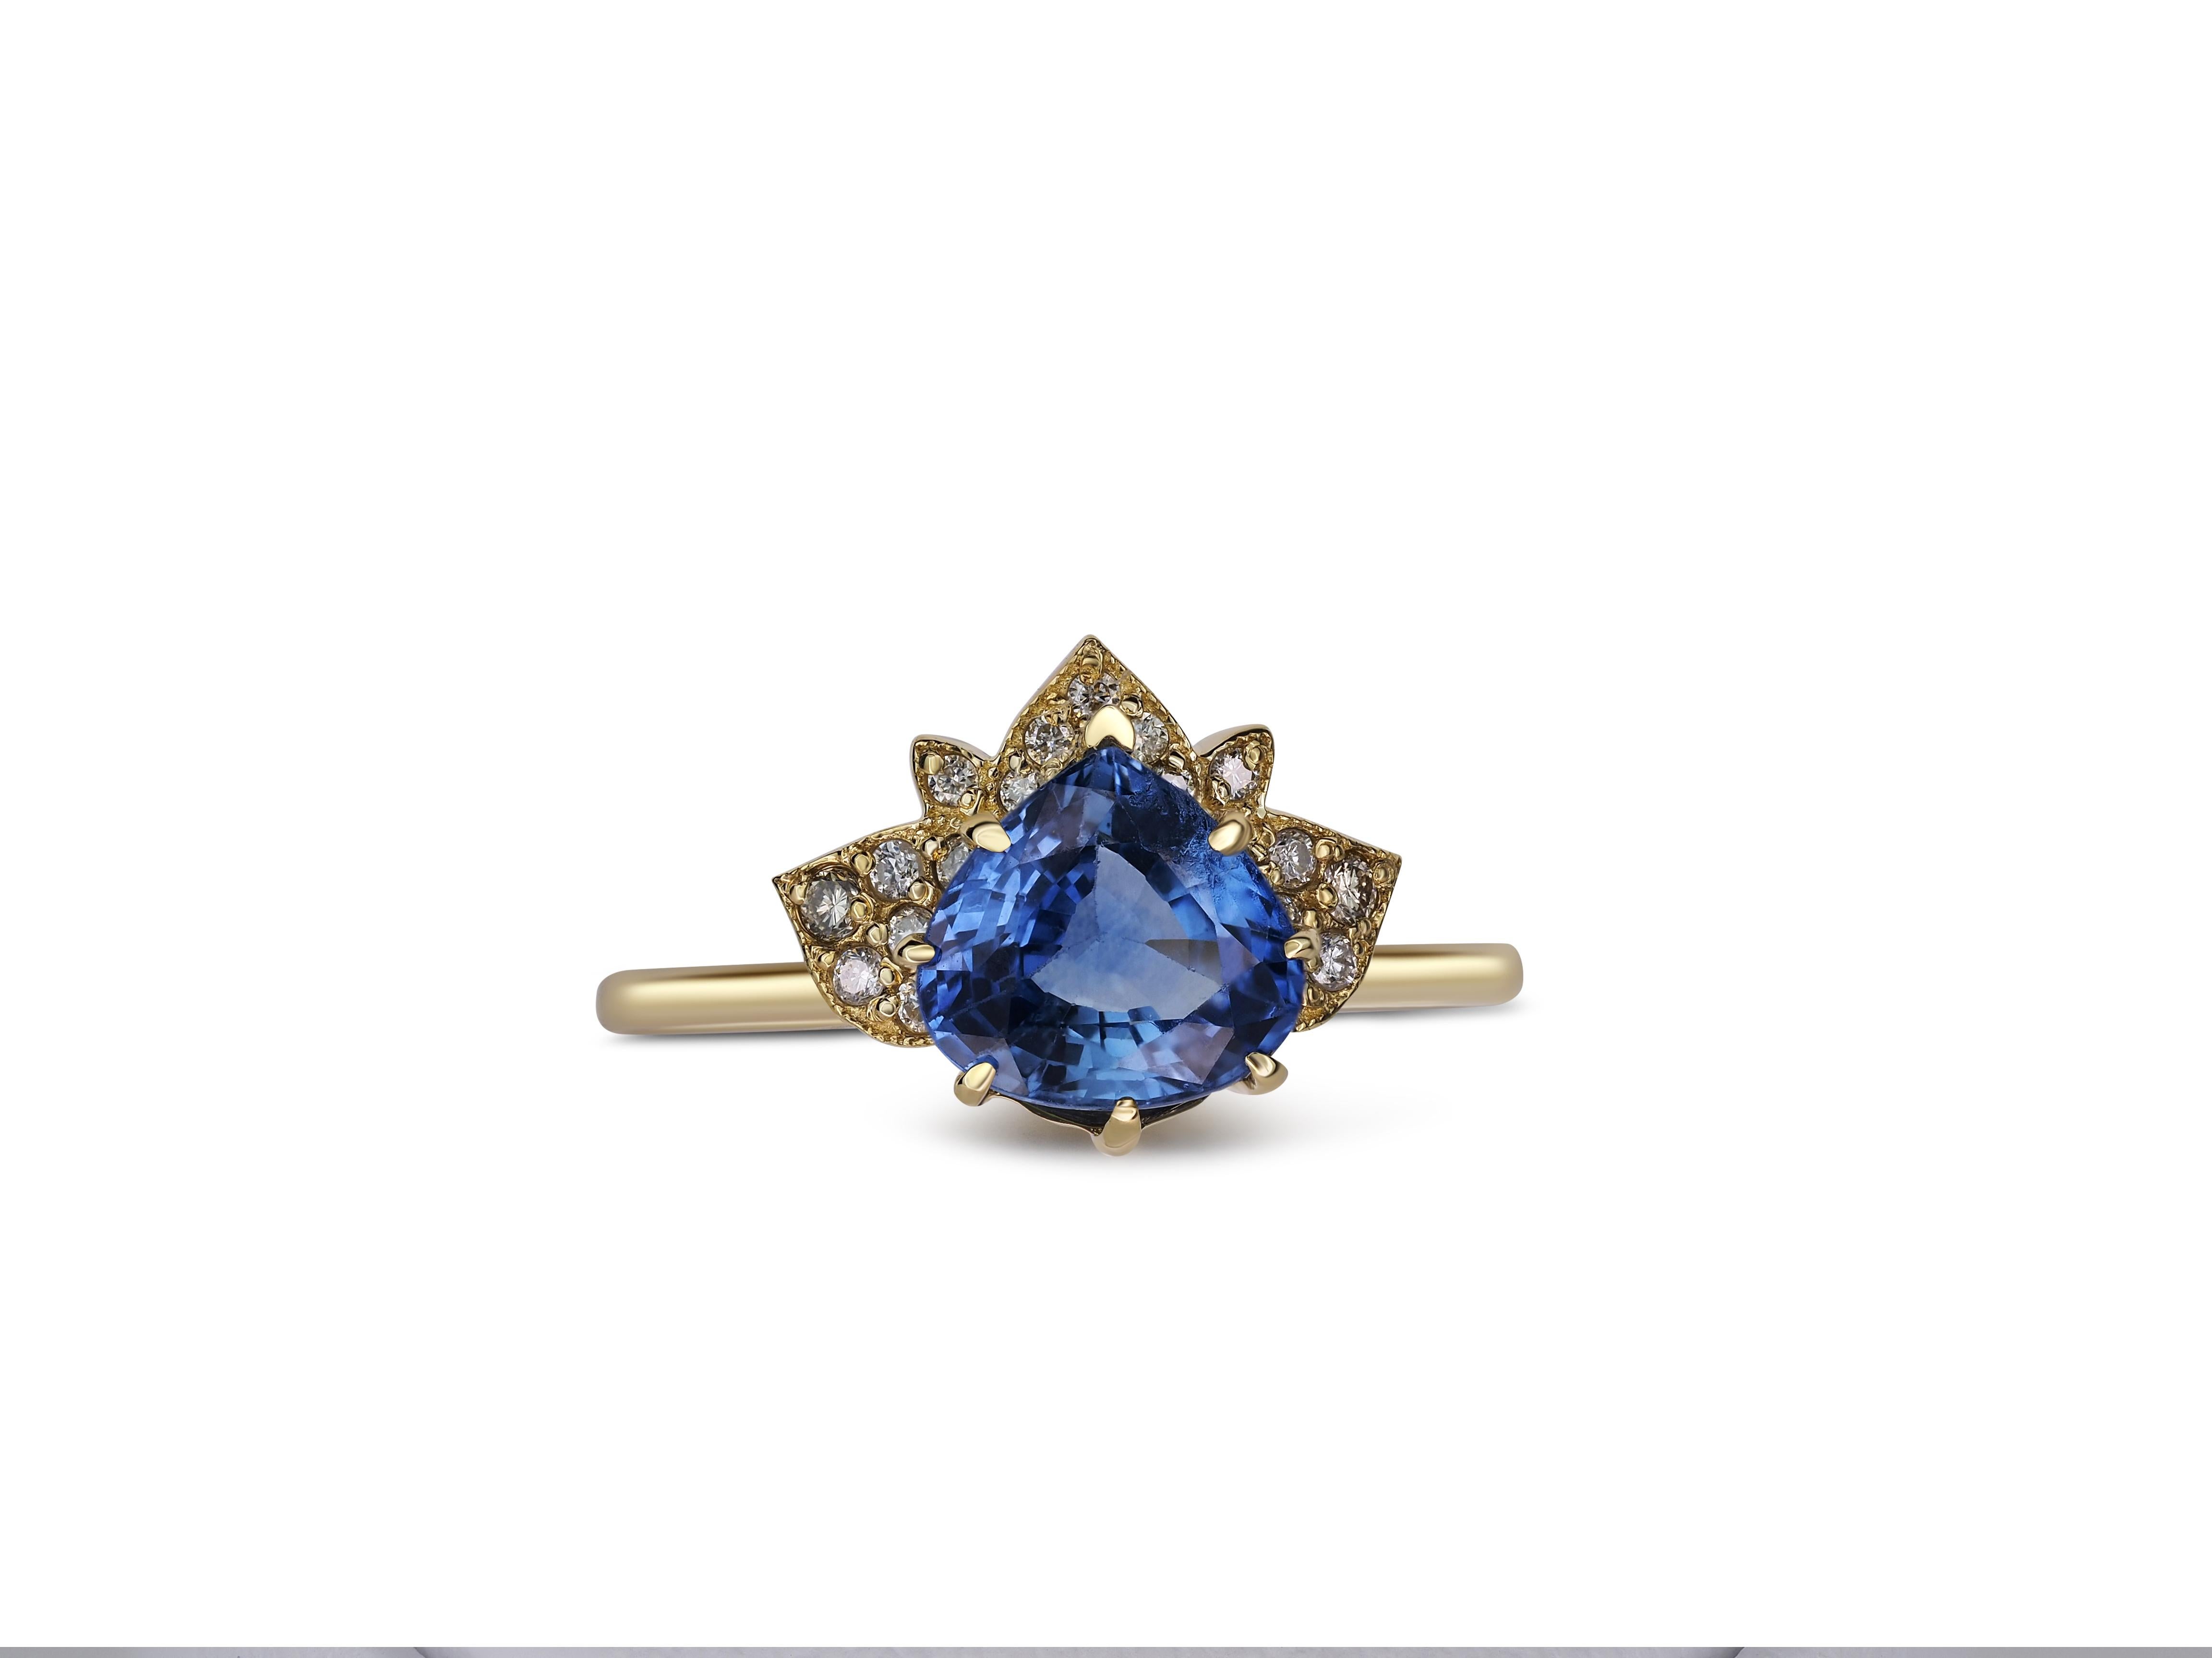 Modern Pear Sapphire Ring, Lotus Ring with Sapphire, Certified Shri Lanka Sapphire Ring